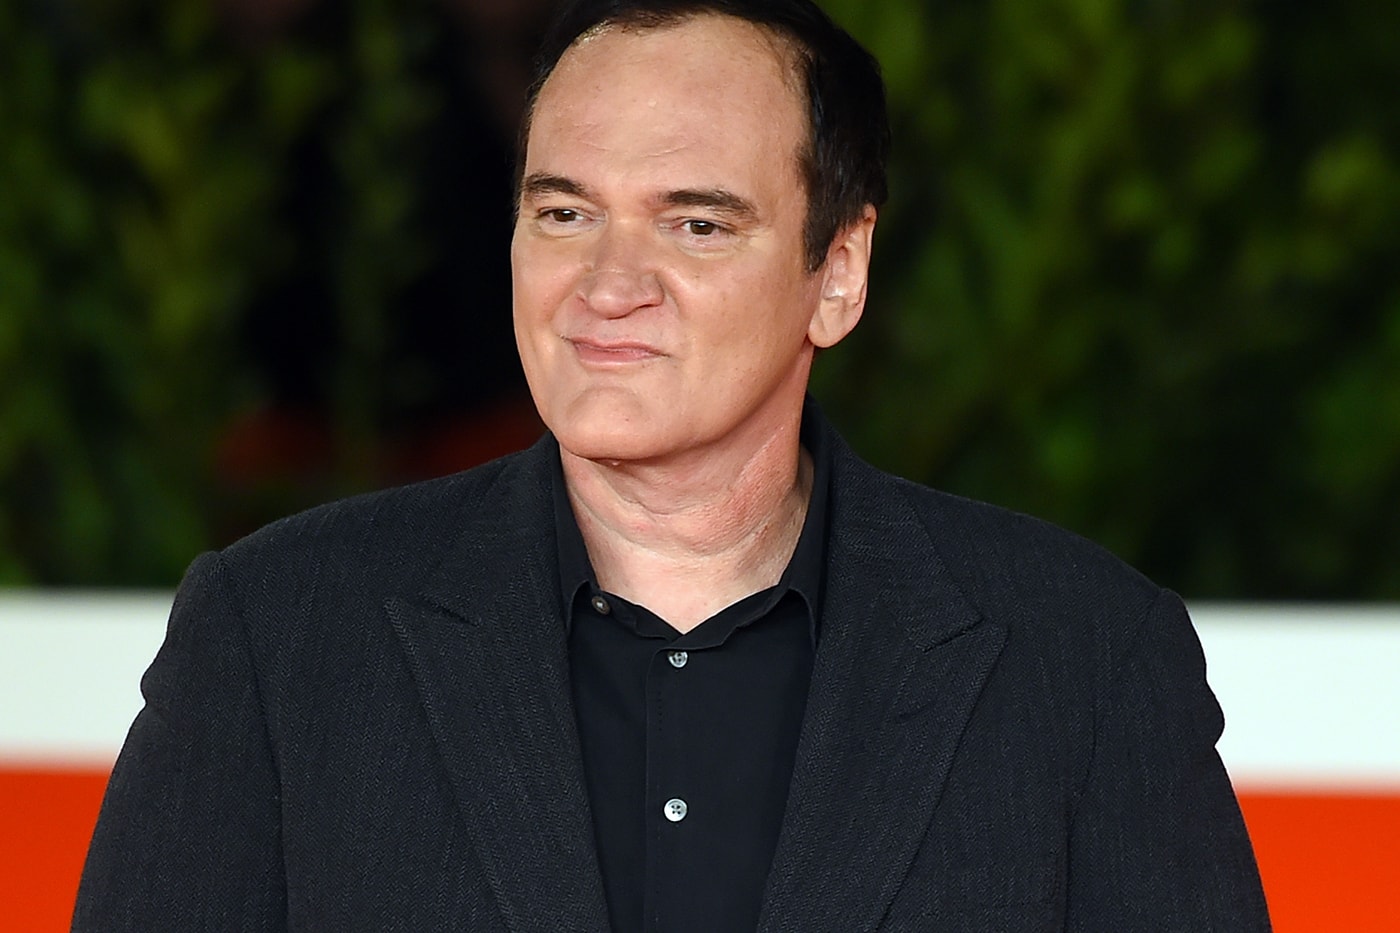 Quentin Tarantino Teases Details New Project comedy film kill bill 3 once upon a time in hollywood